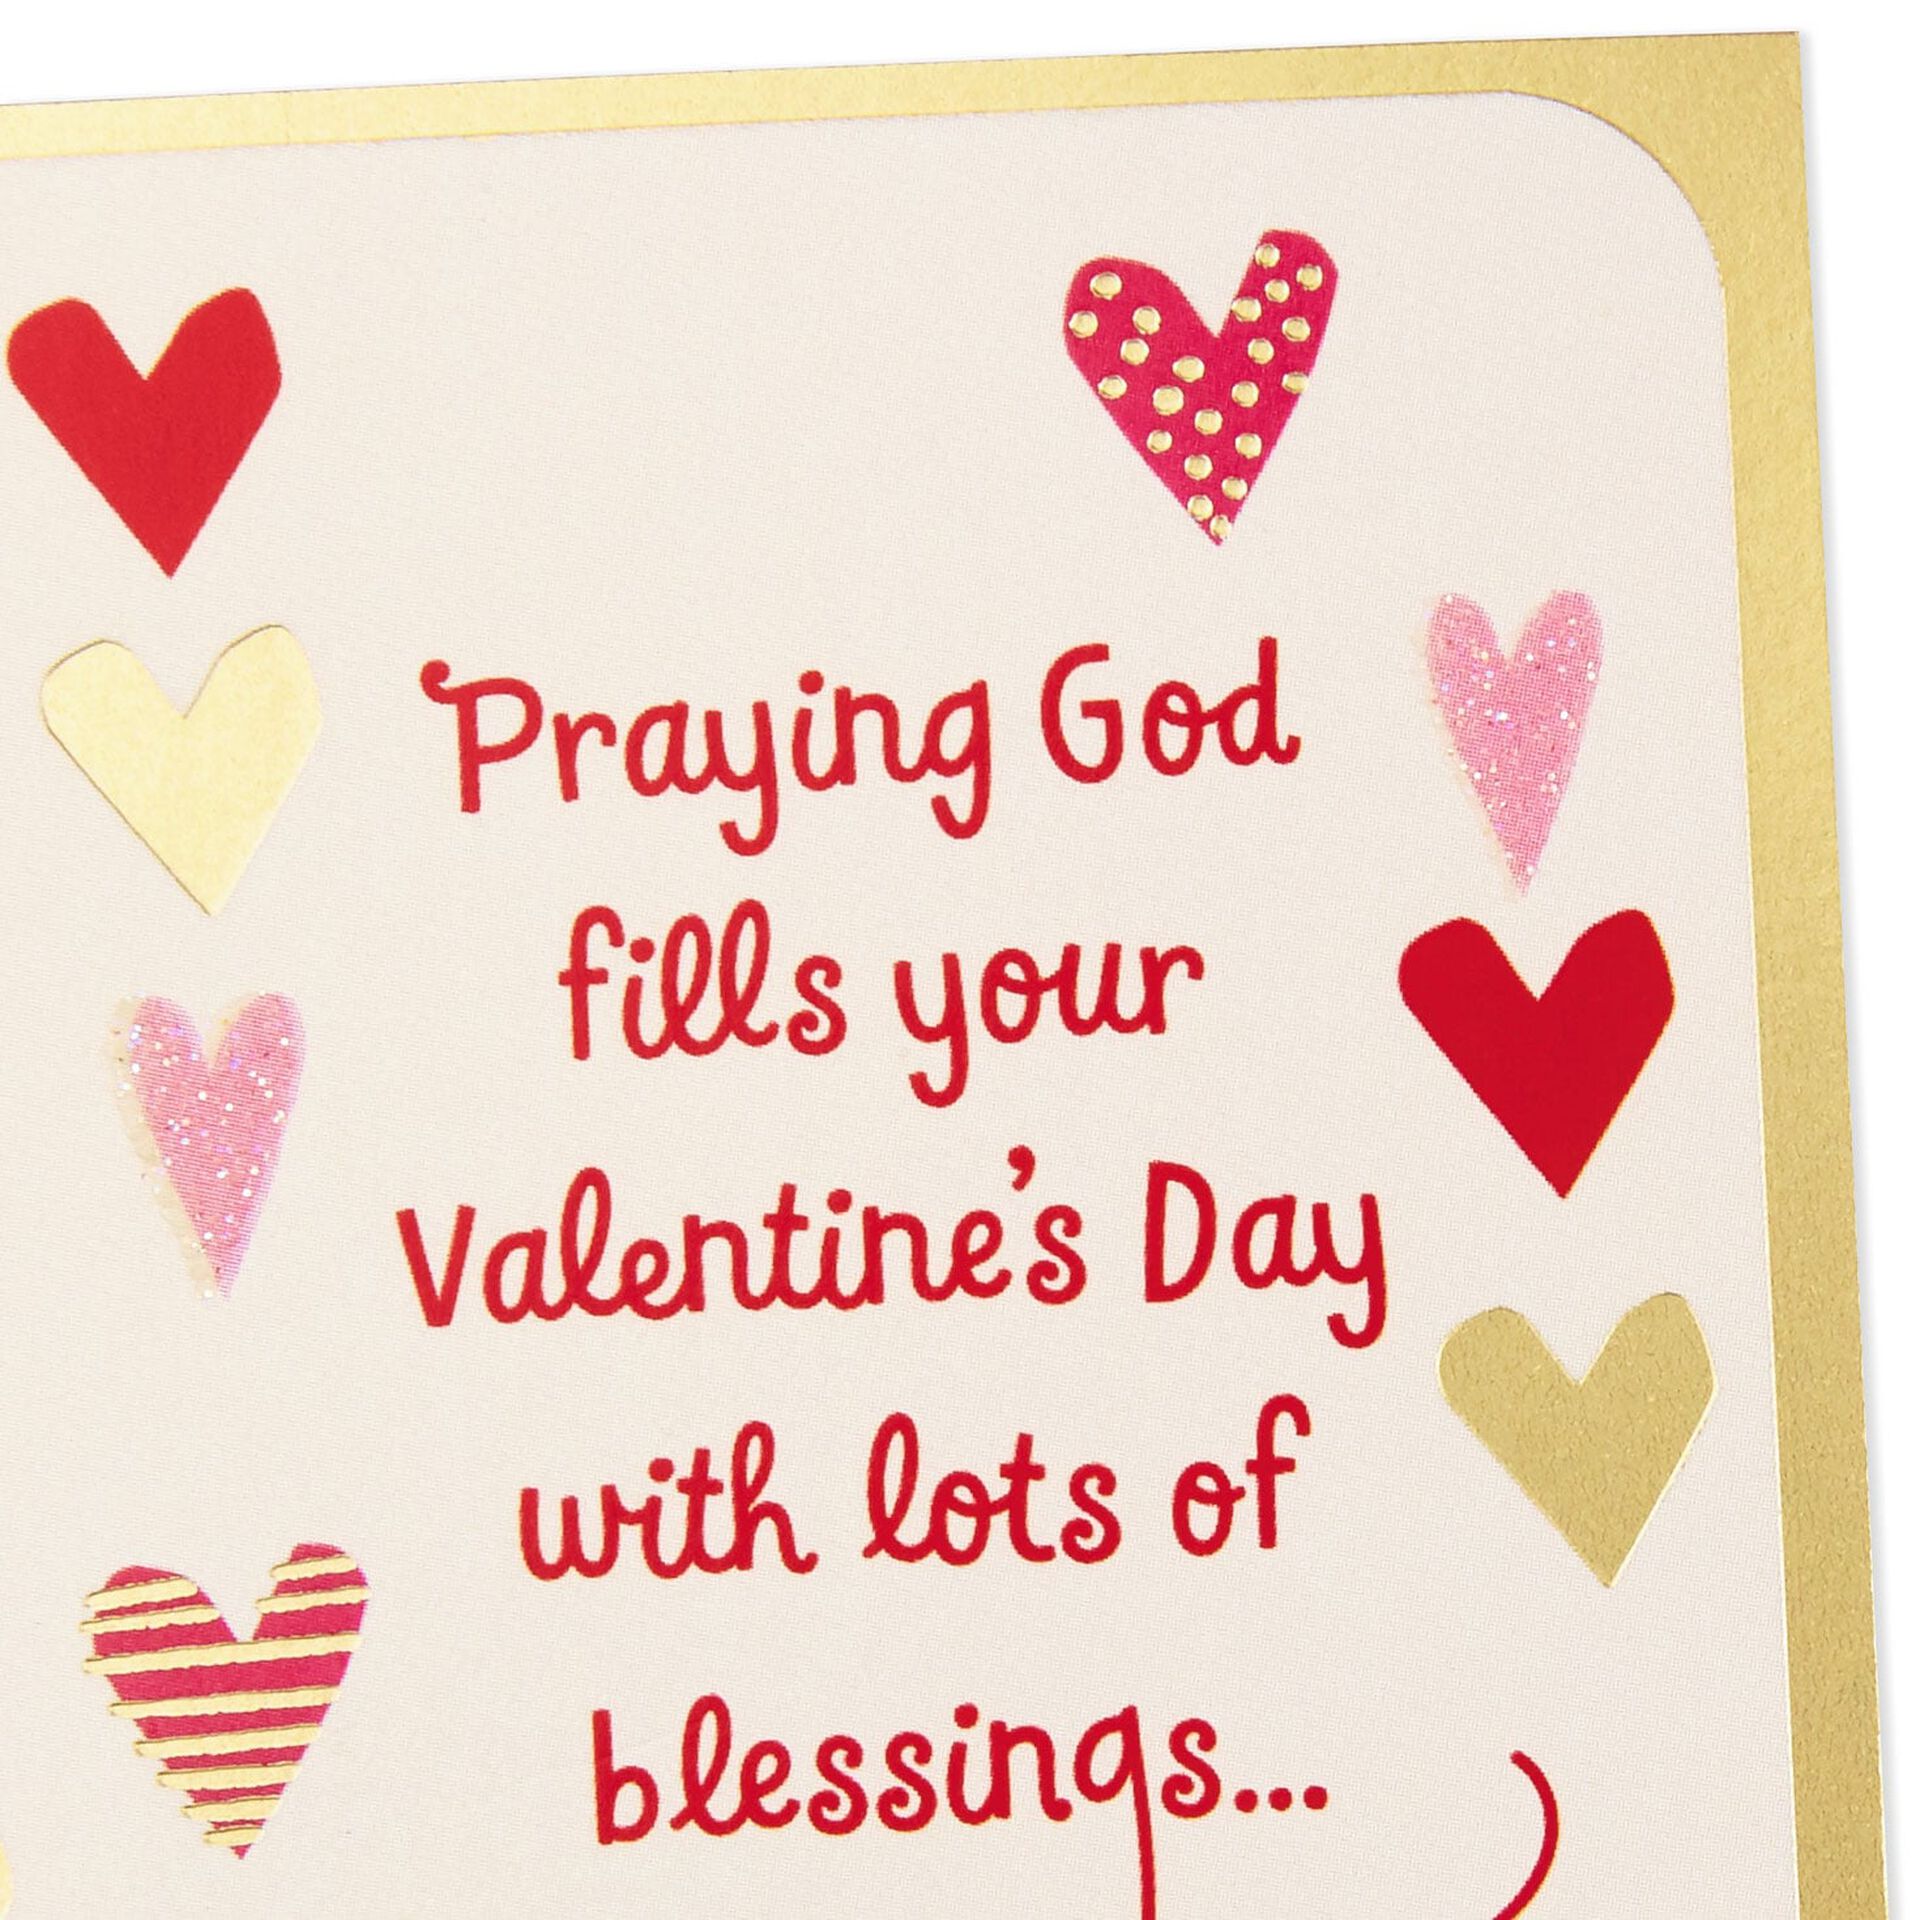 blessings-and-love-religious-valentine-s-day-cards-pack-of-6-boxed